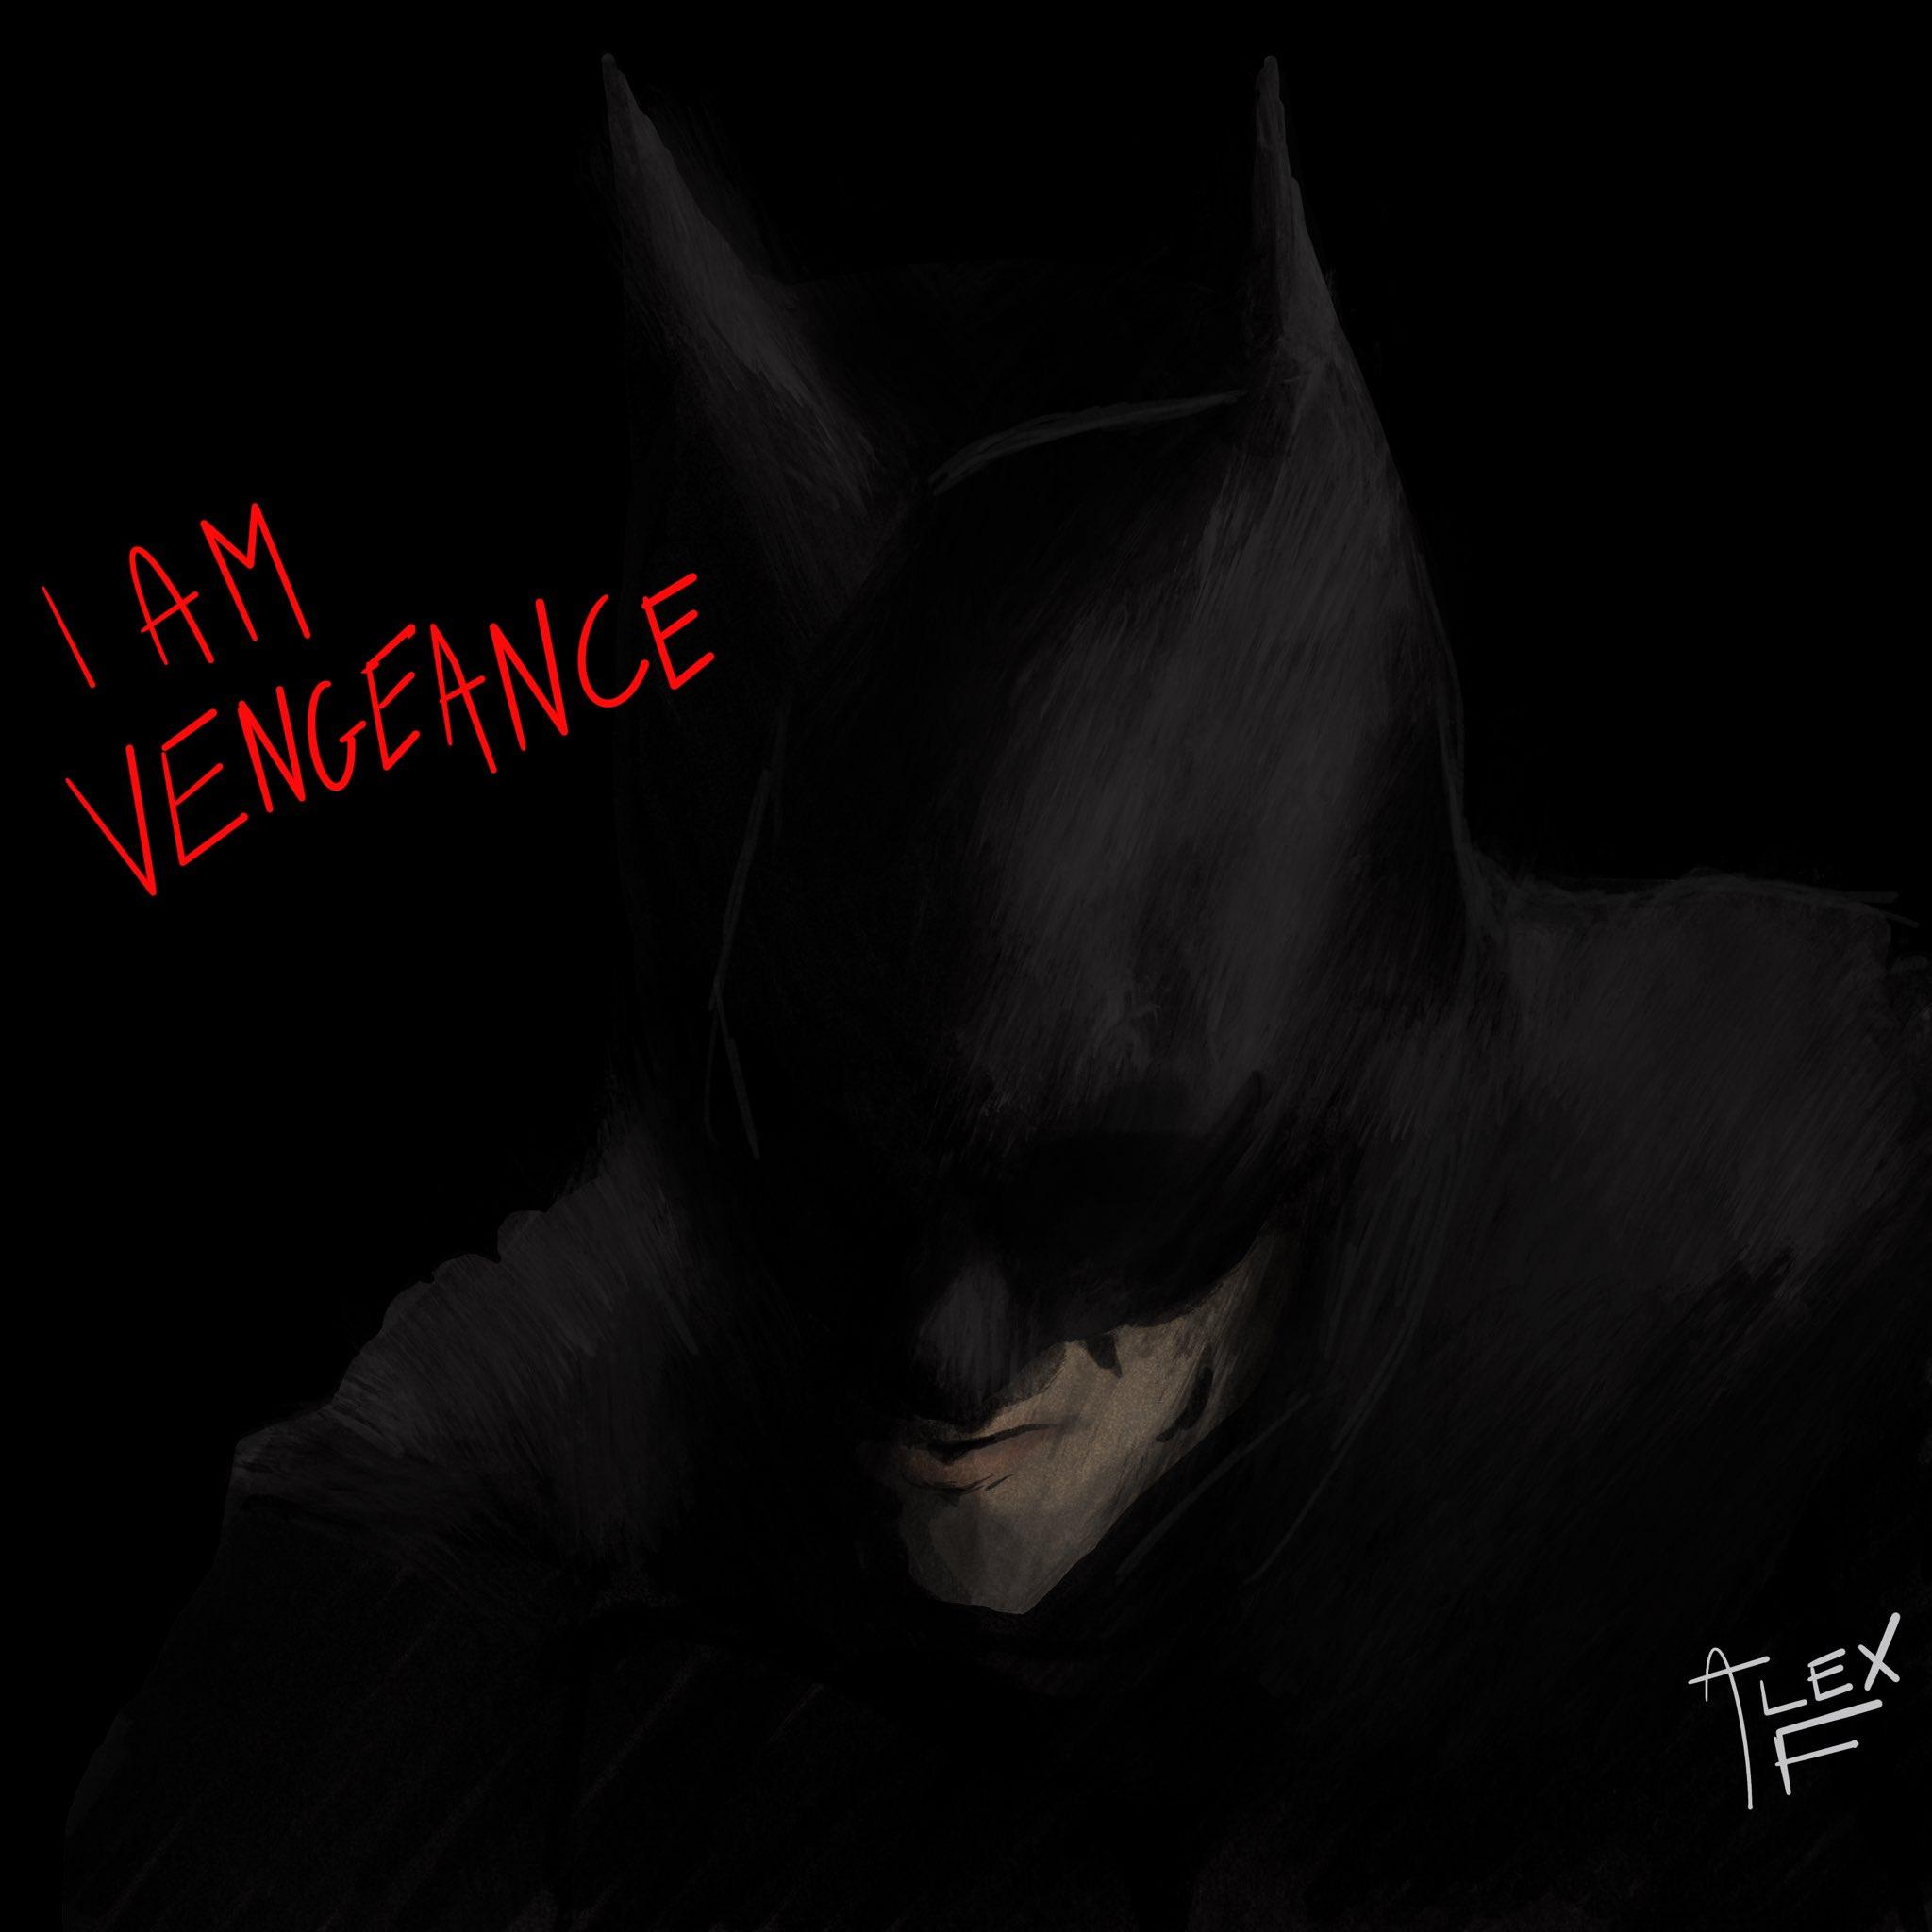 vengeance» 1080P, 2k, 4k HD wallpapers, backgrounds free download | Rare  Gallery